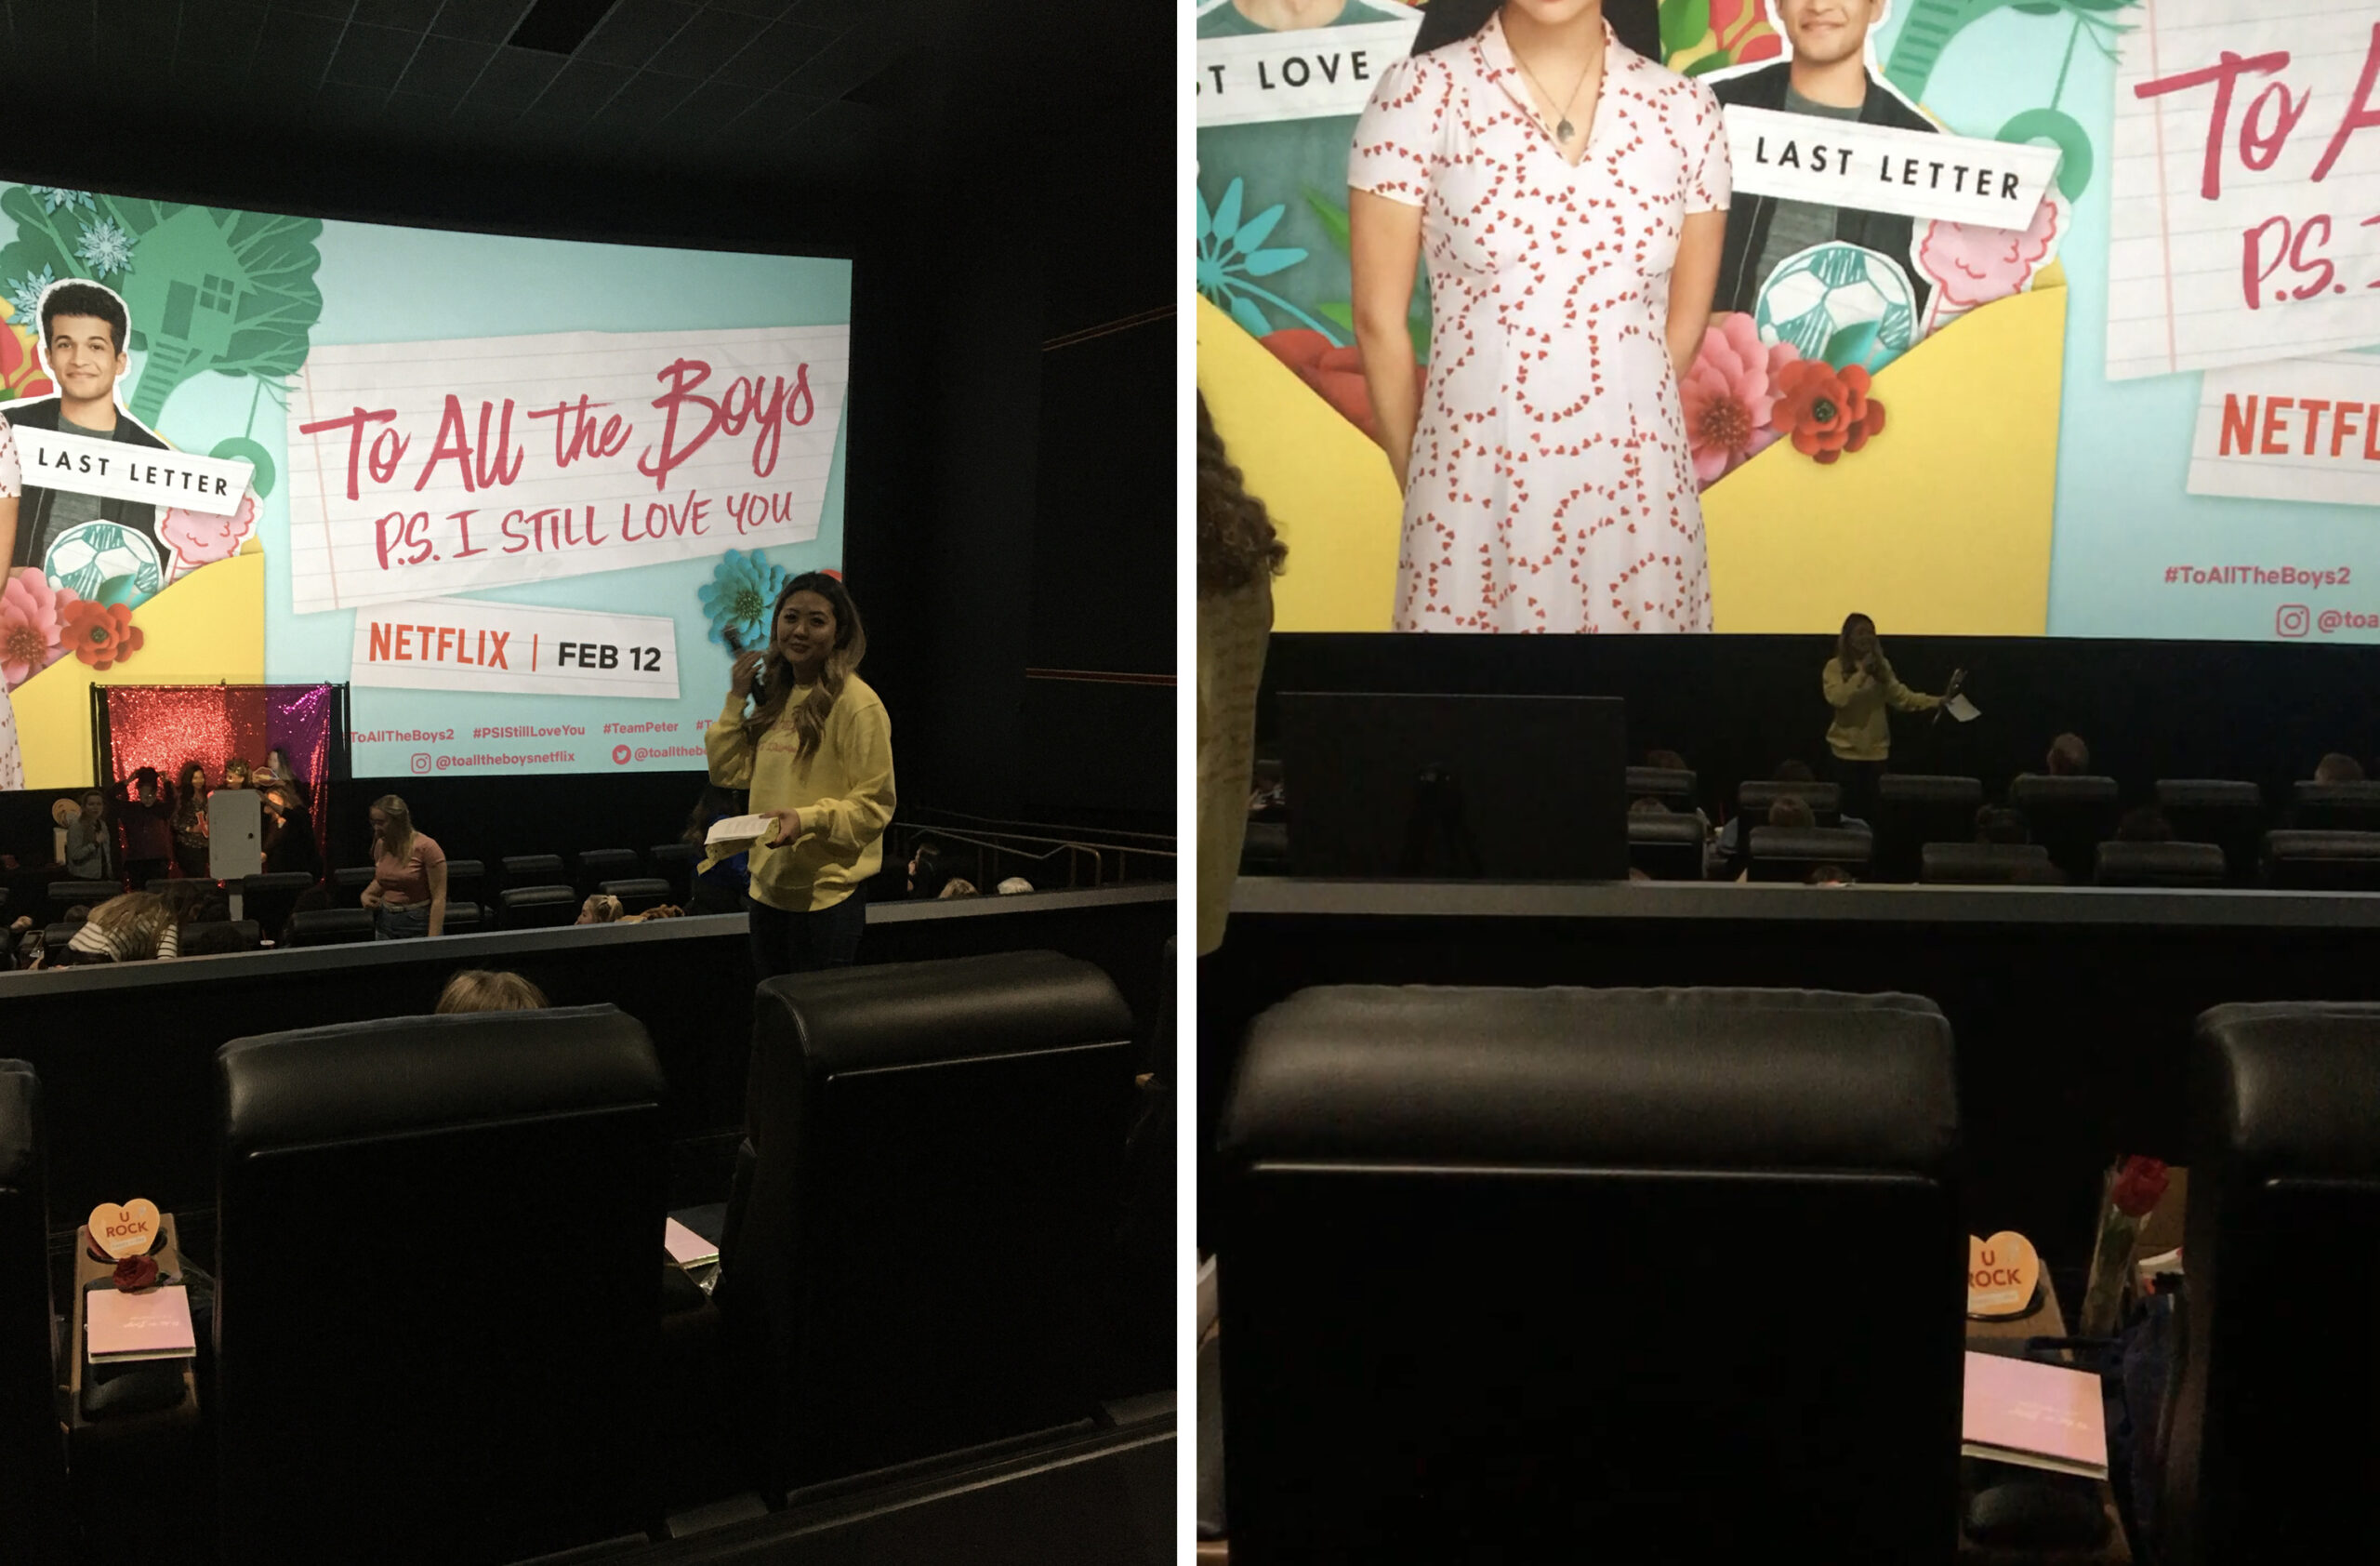 Movie premiere for To All the Boys PS I Still Love You.